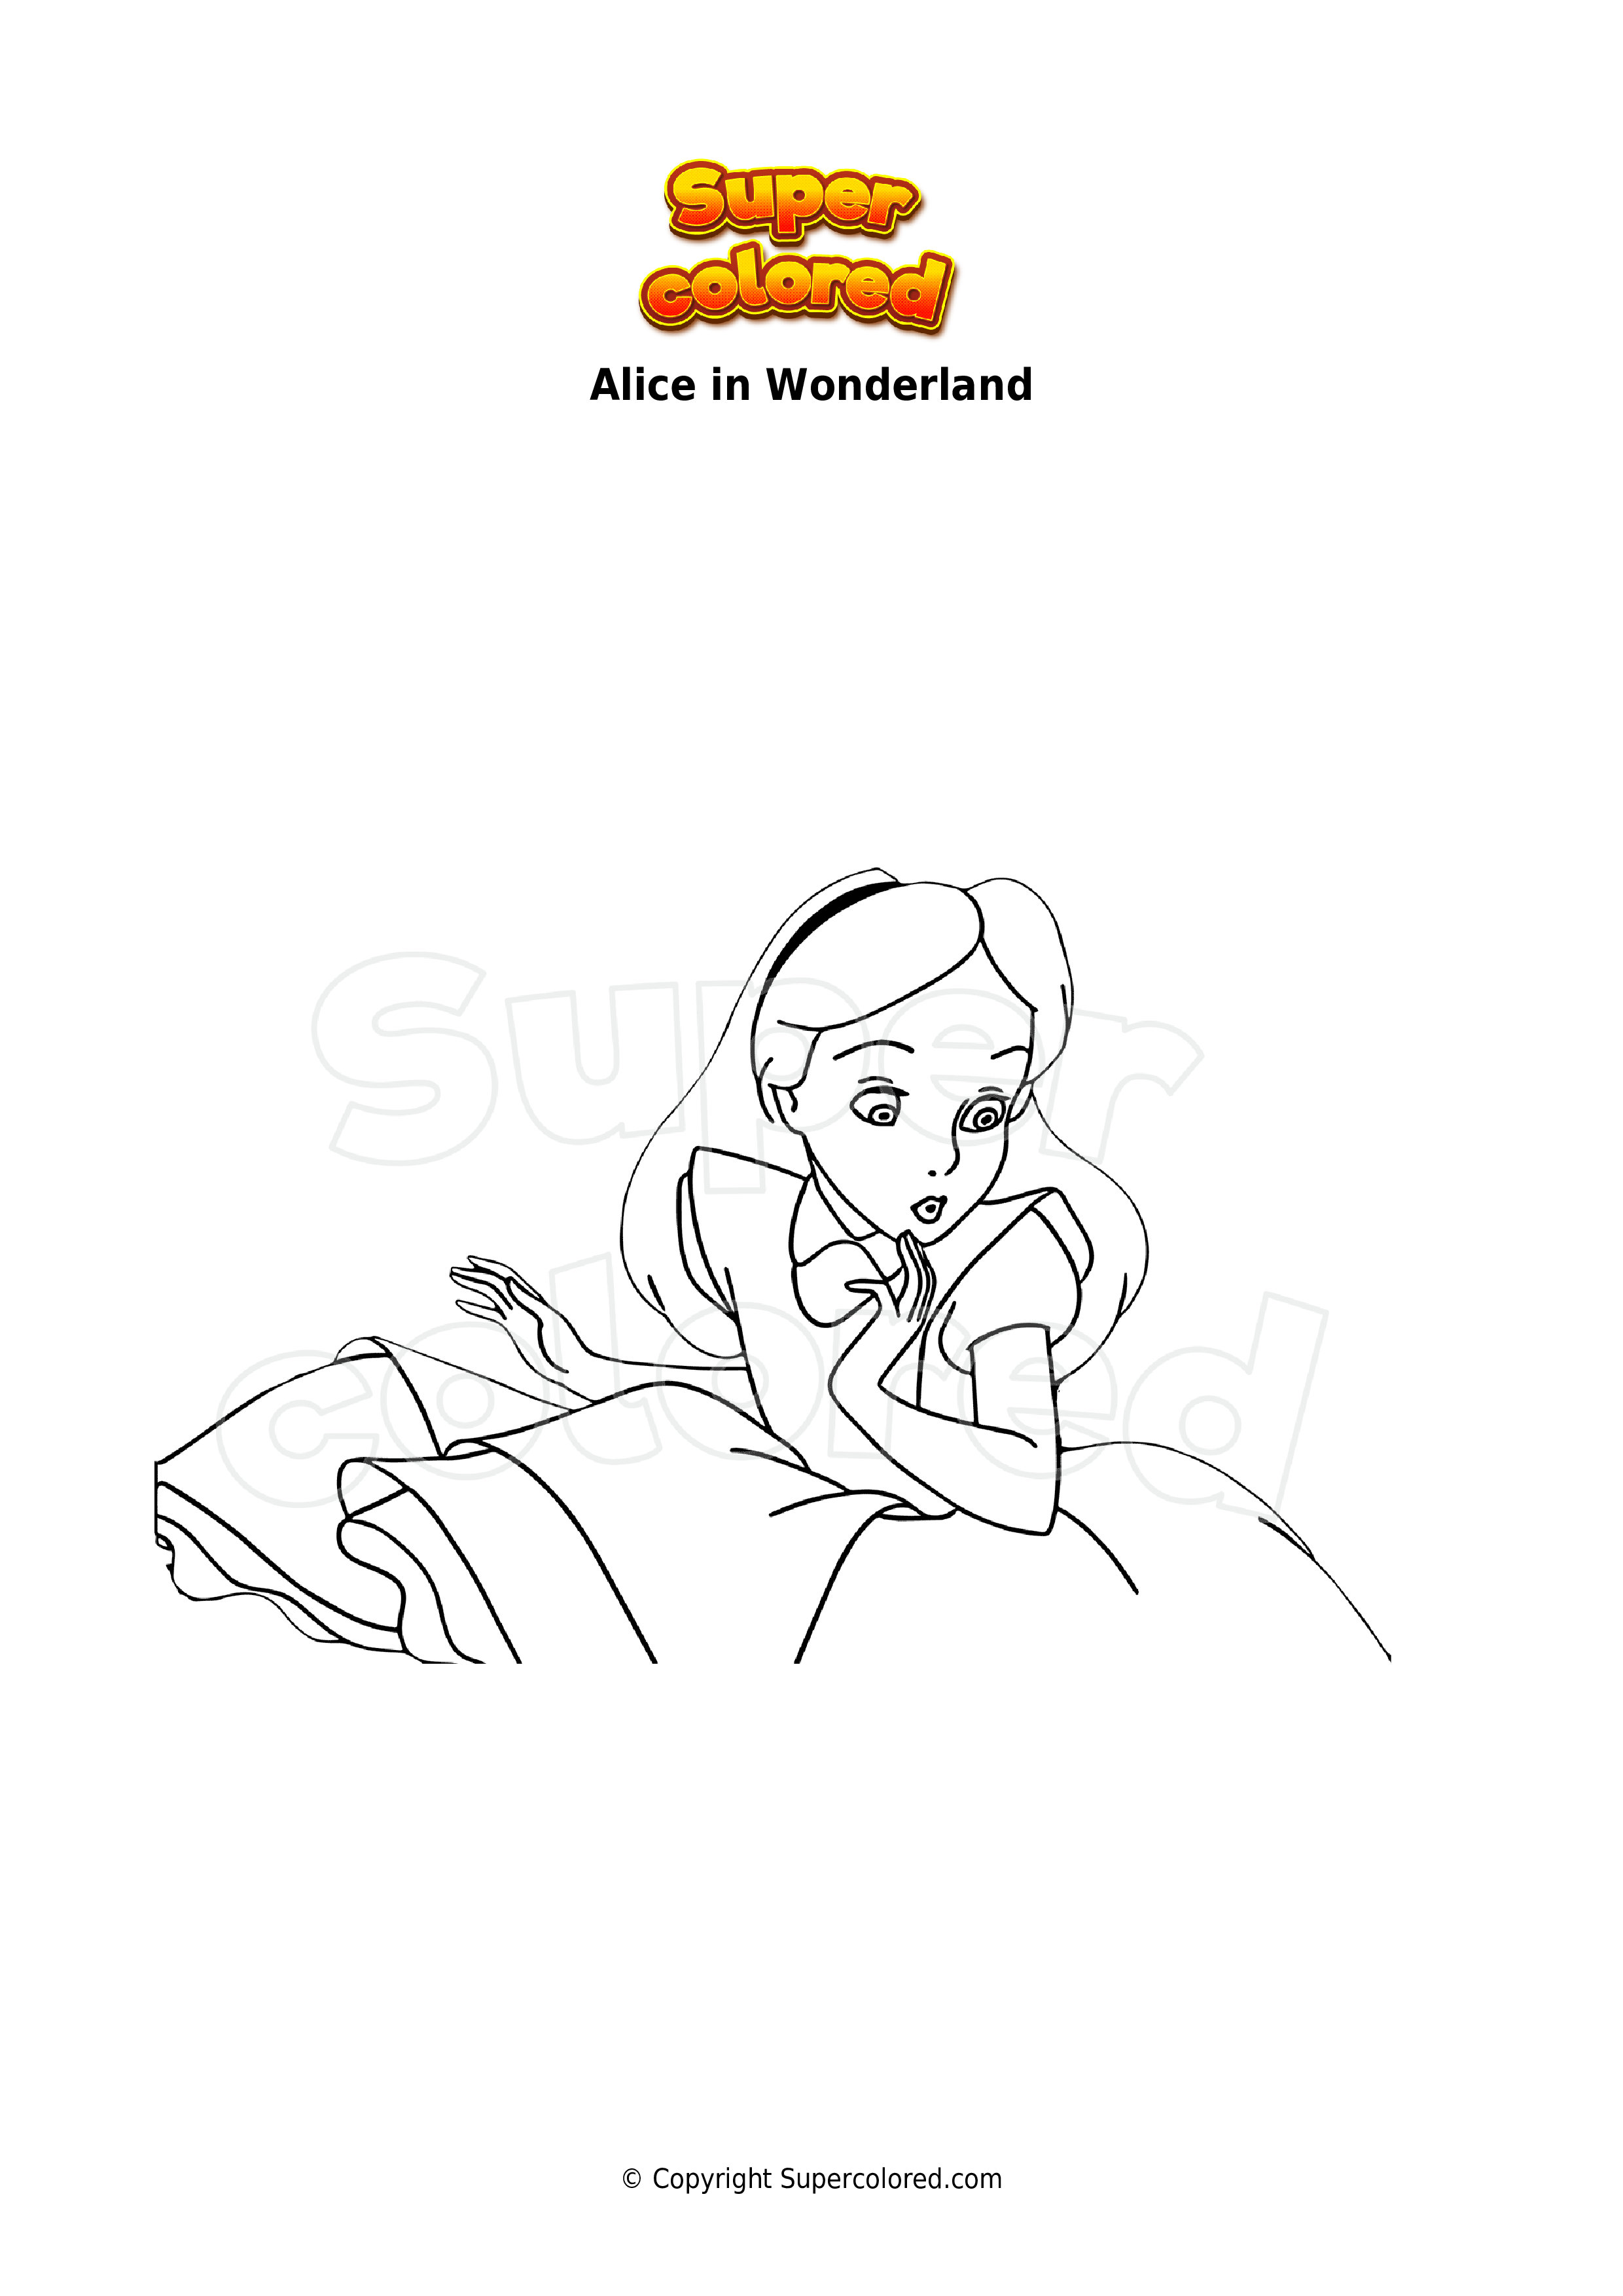 coloring-page-alice-in-wonderland-supercolored